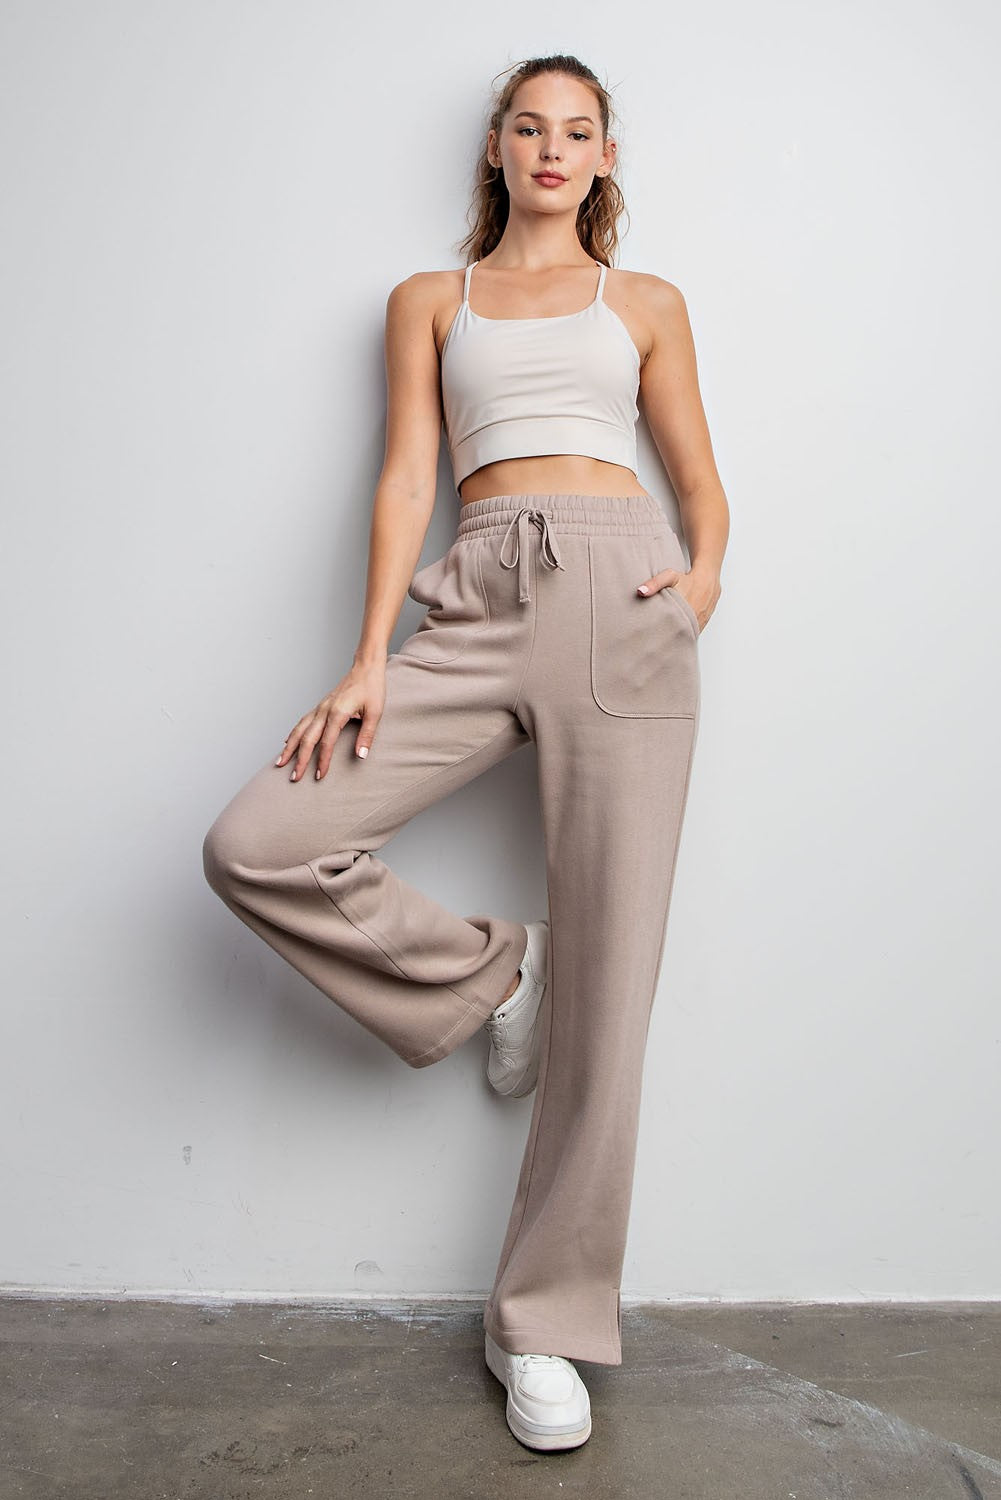 French Terry Straight Leg Pants (2 colors) taupe or Heather gray – Sofi  Stella Women's & Children's Boutique